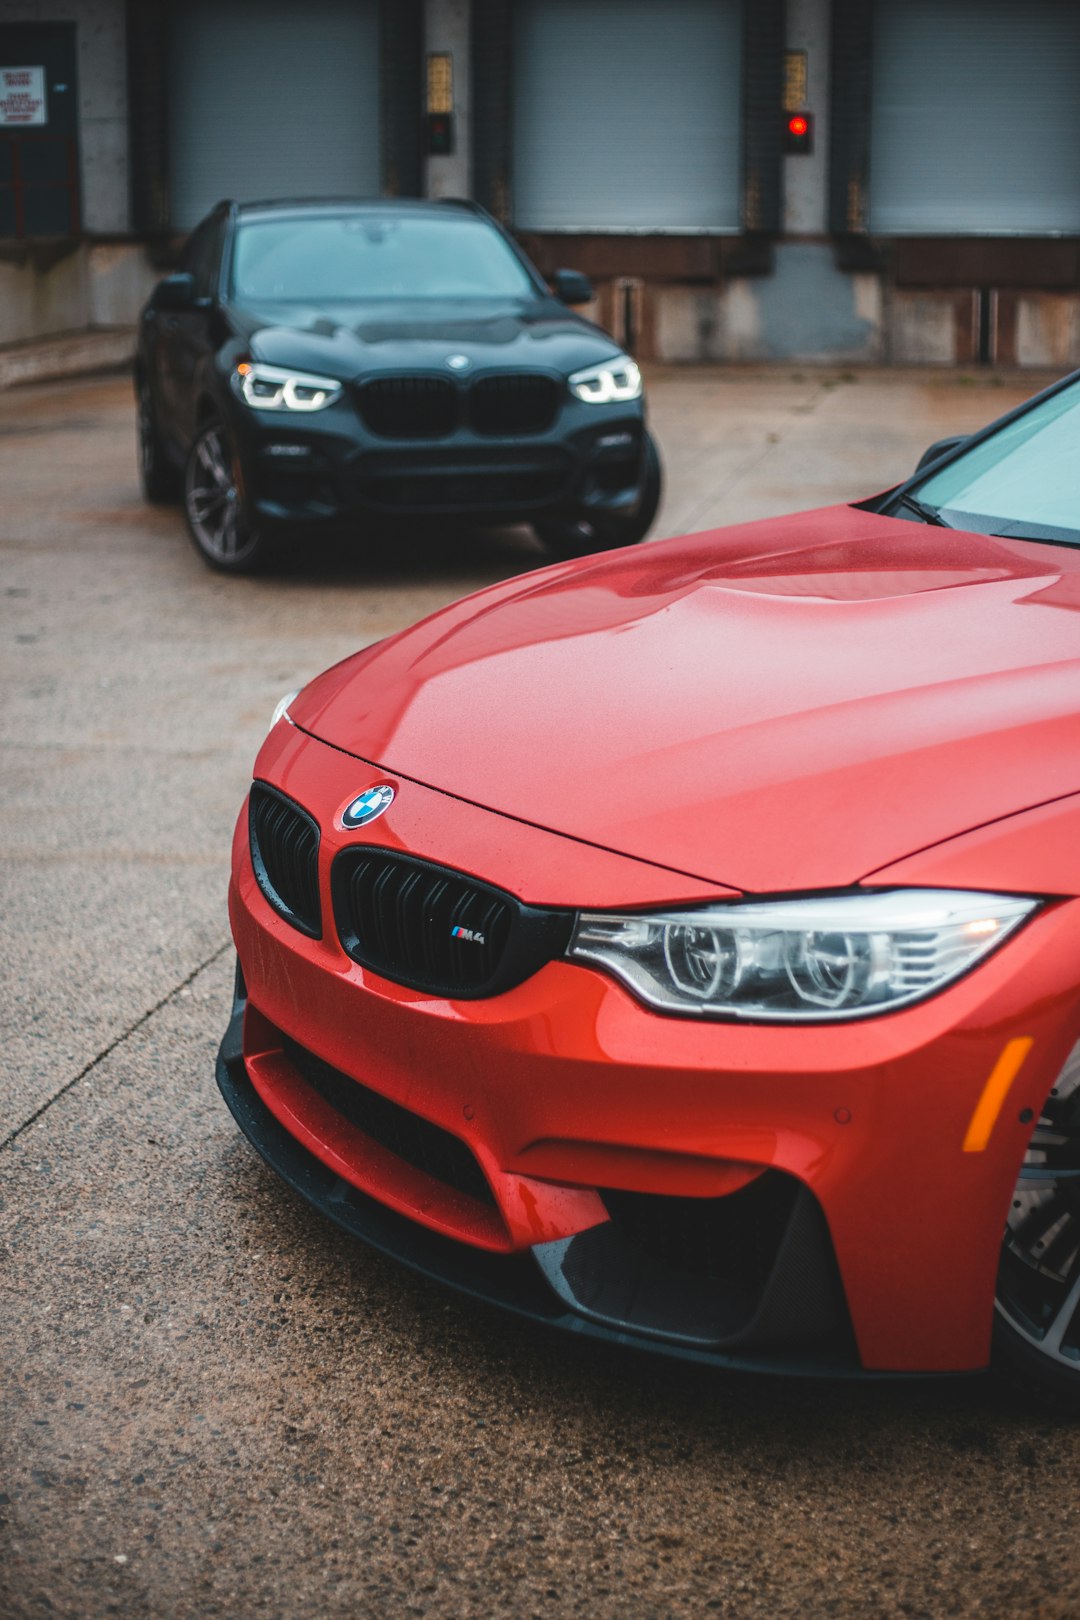 red bmw m 3 parked on gray concrete pavement during daytime